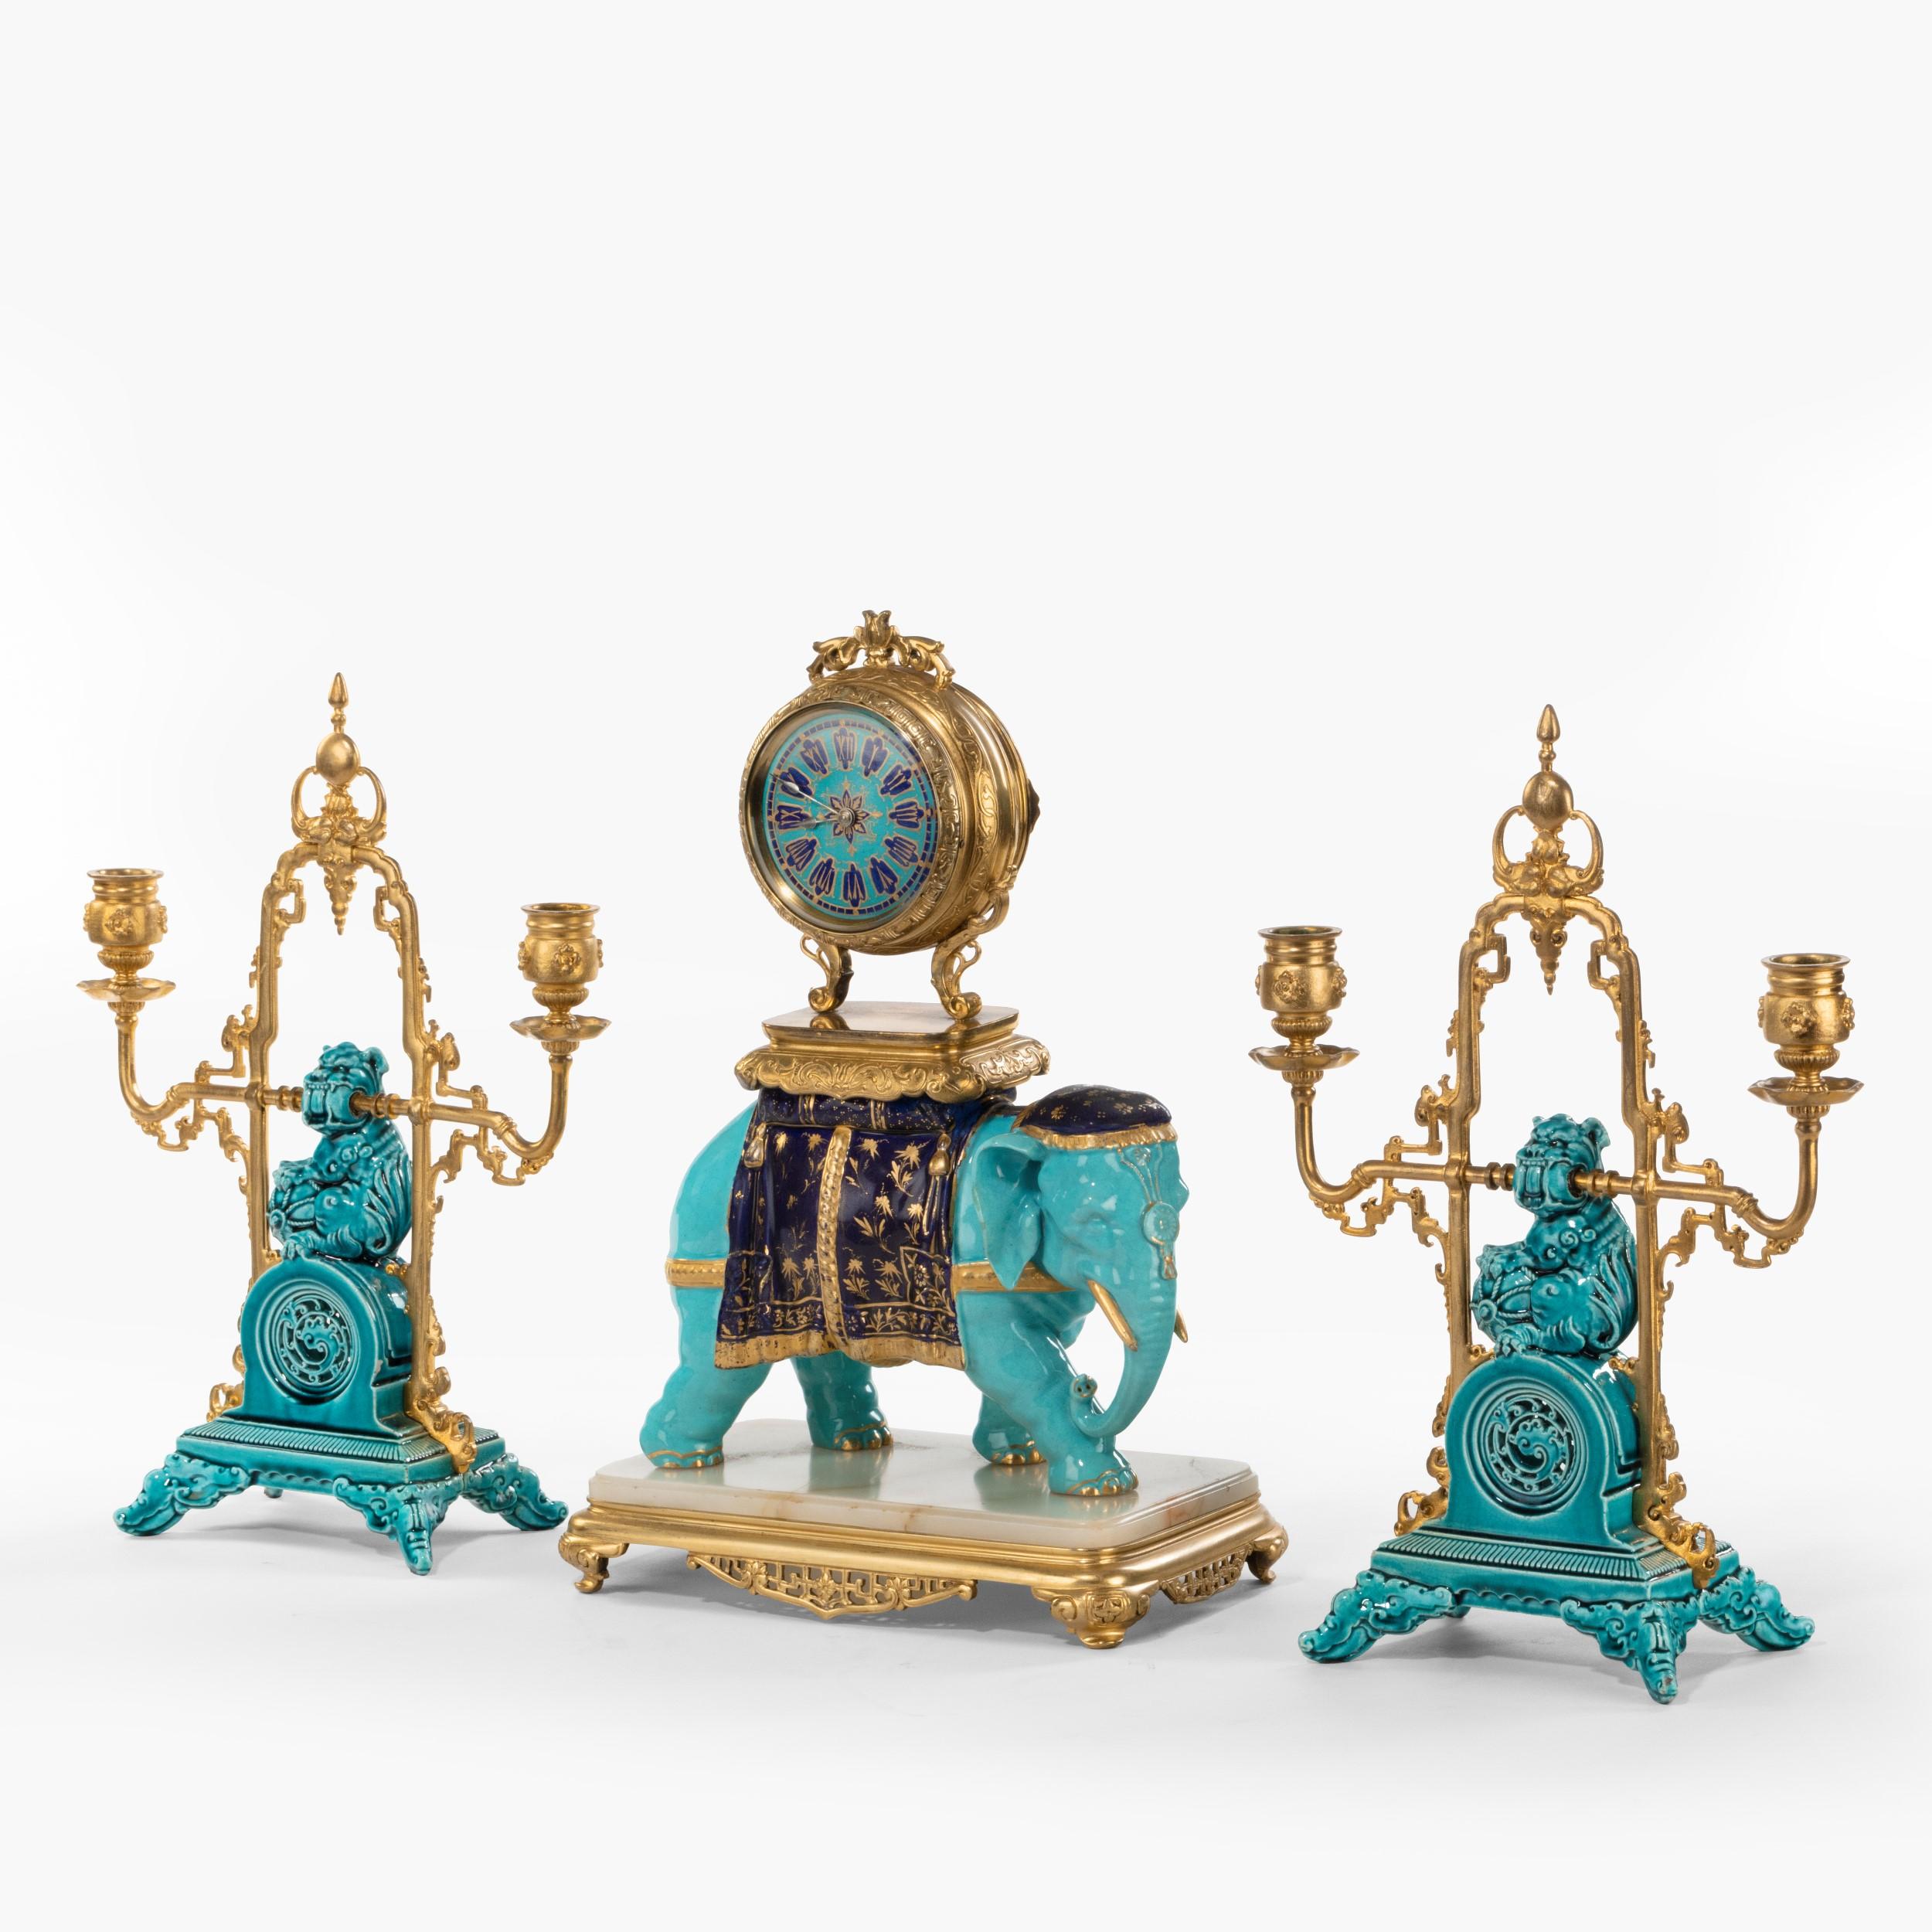 A French Garniture de Cheminée in the Chinoiserie Taste

Constructed in blue turquoise porcelain with gilt highlights, Algerian onyx and bronze, and comprising a gilt-bronze cased clock with an eight day movement, and delineating the hours in fac